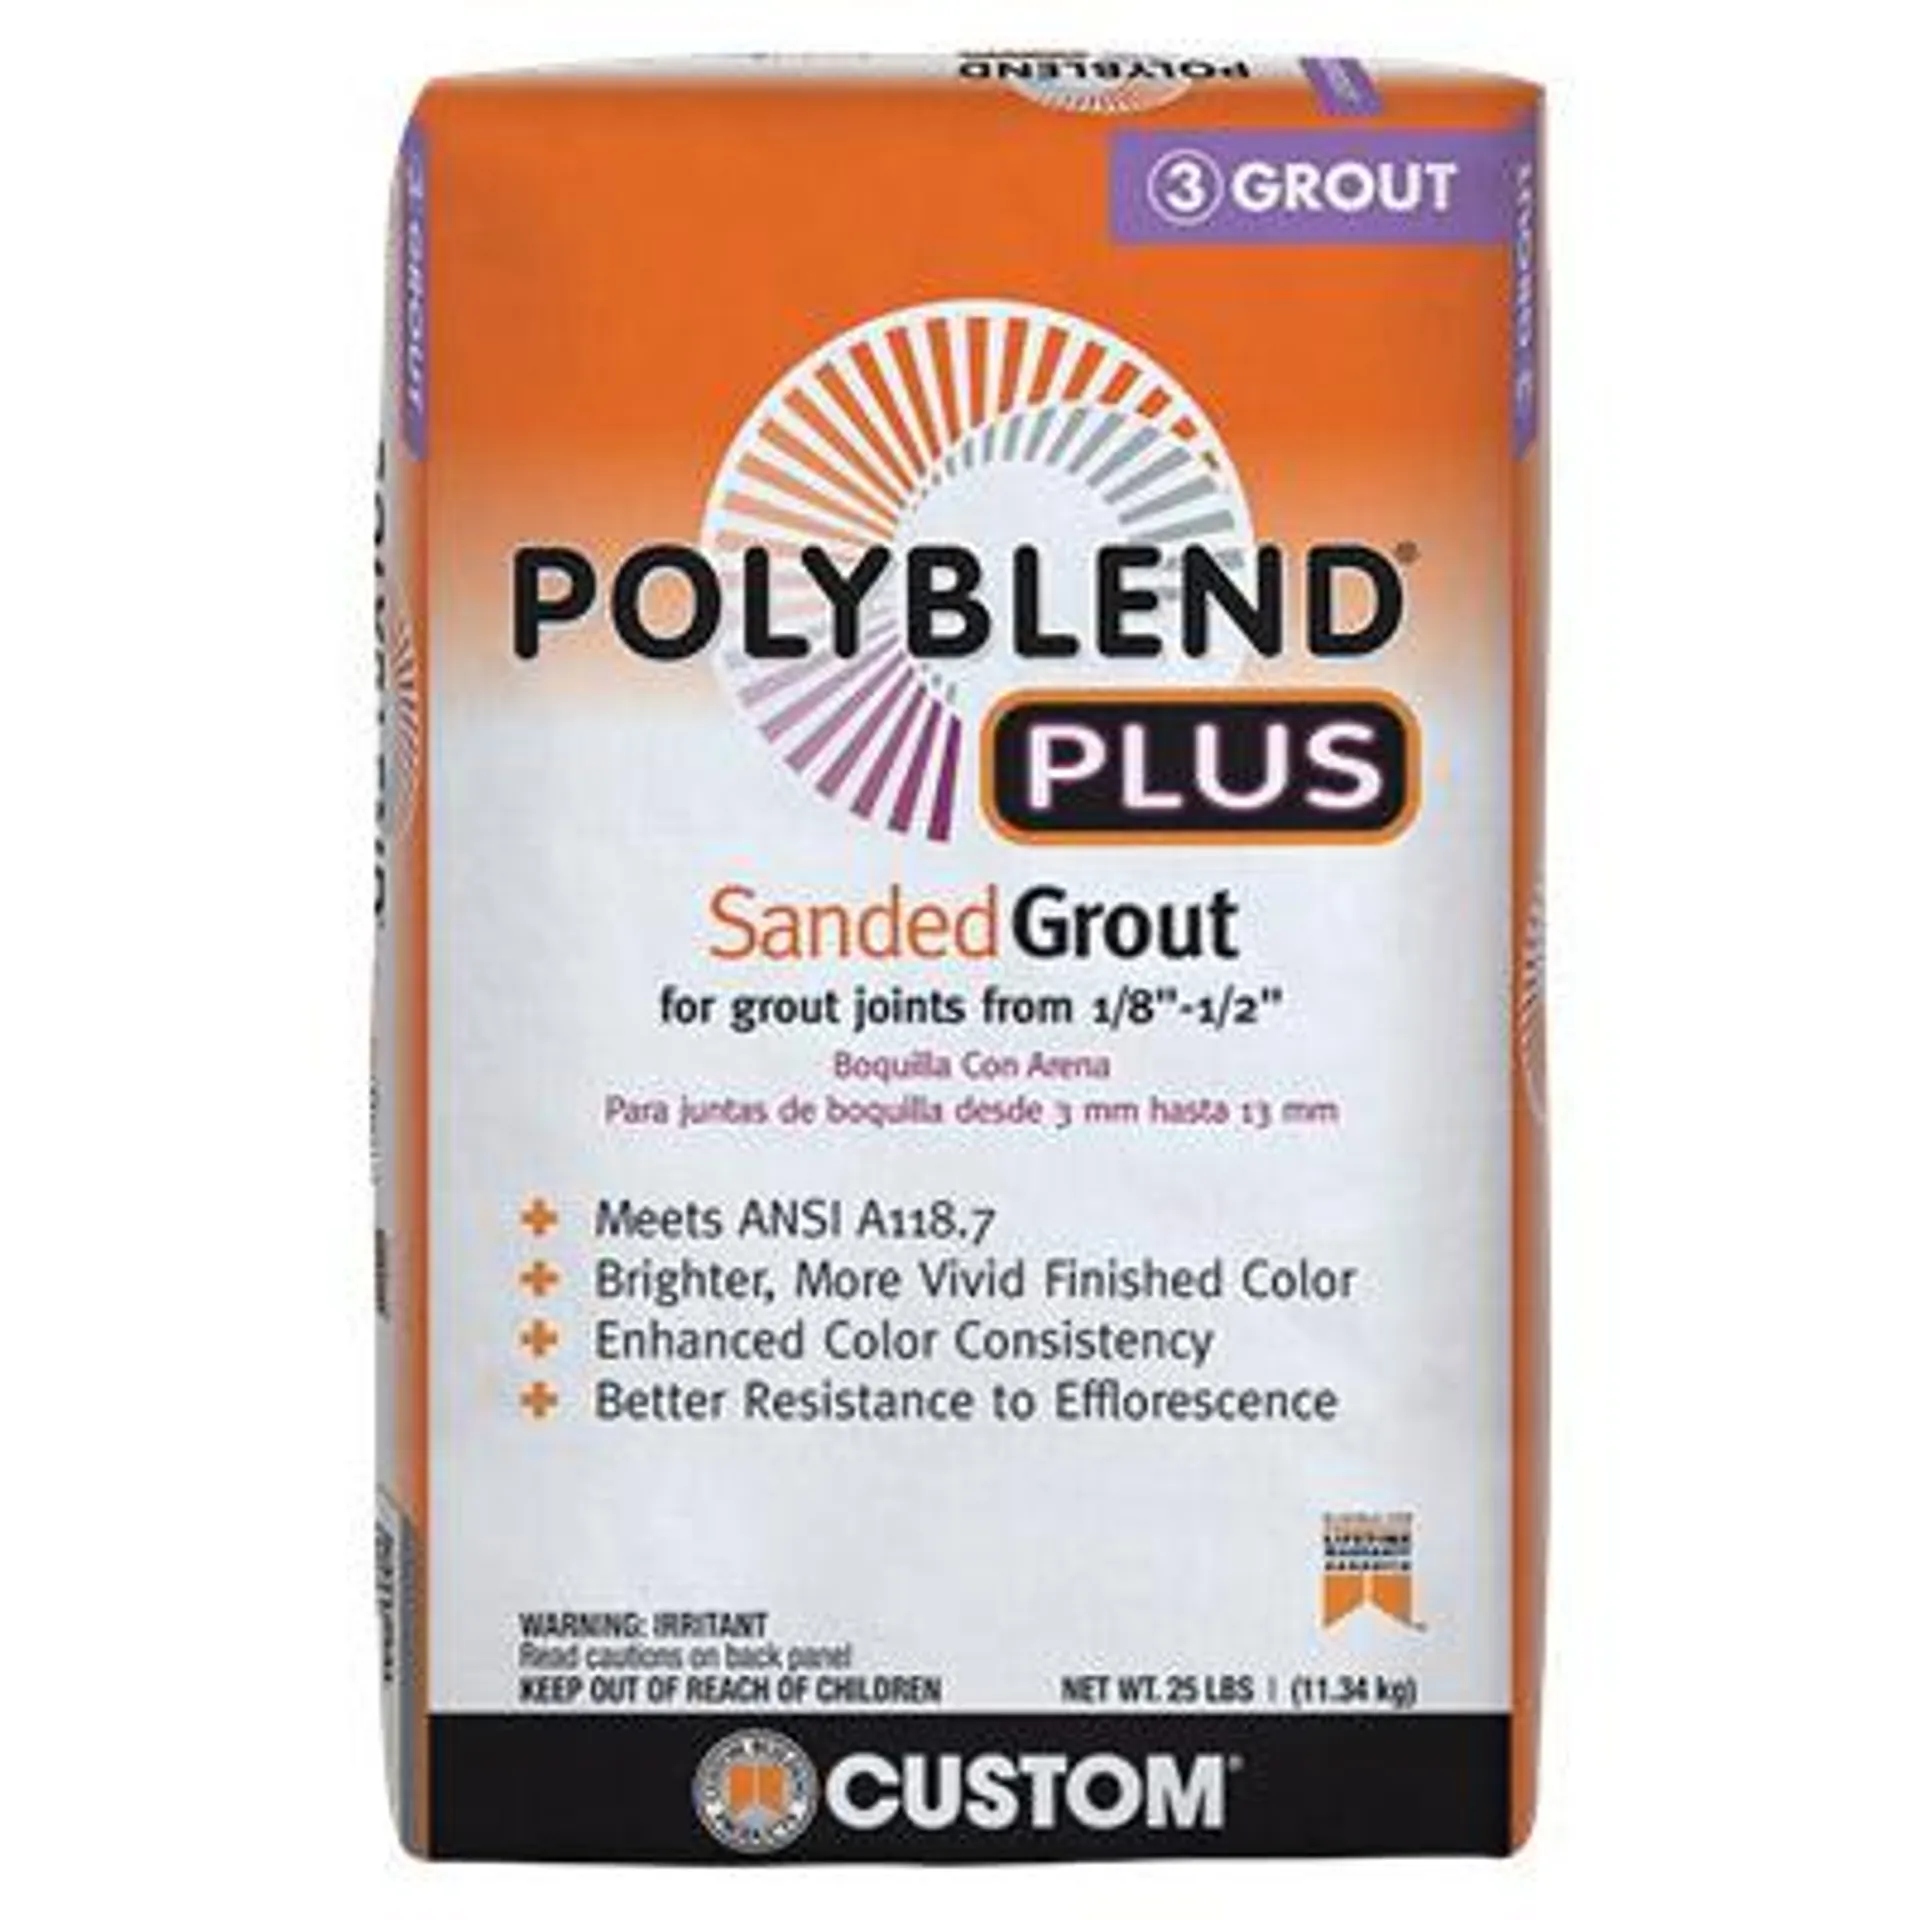 Polyblend Plus PBPG0925 Sanded Grout, Powder, Characteristic, Natural Gray, 25 lb Bag